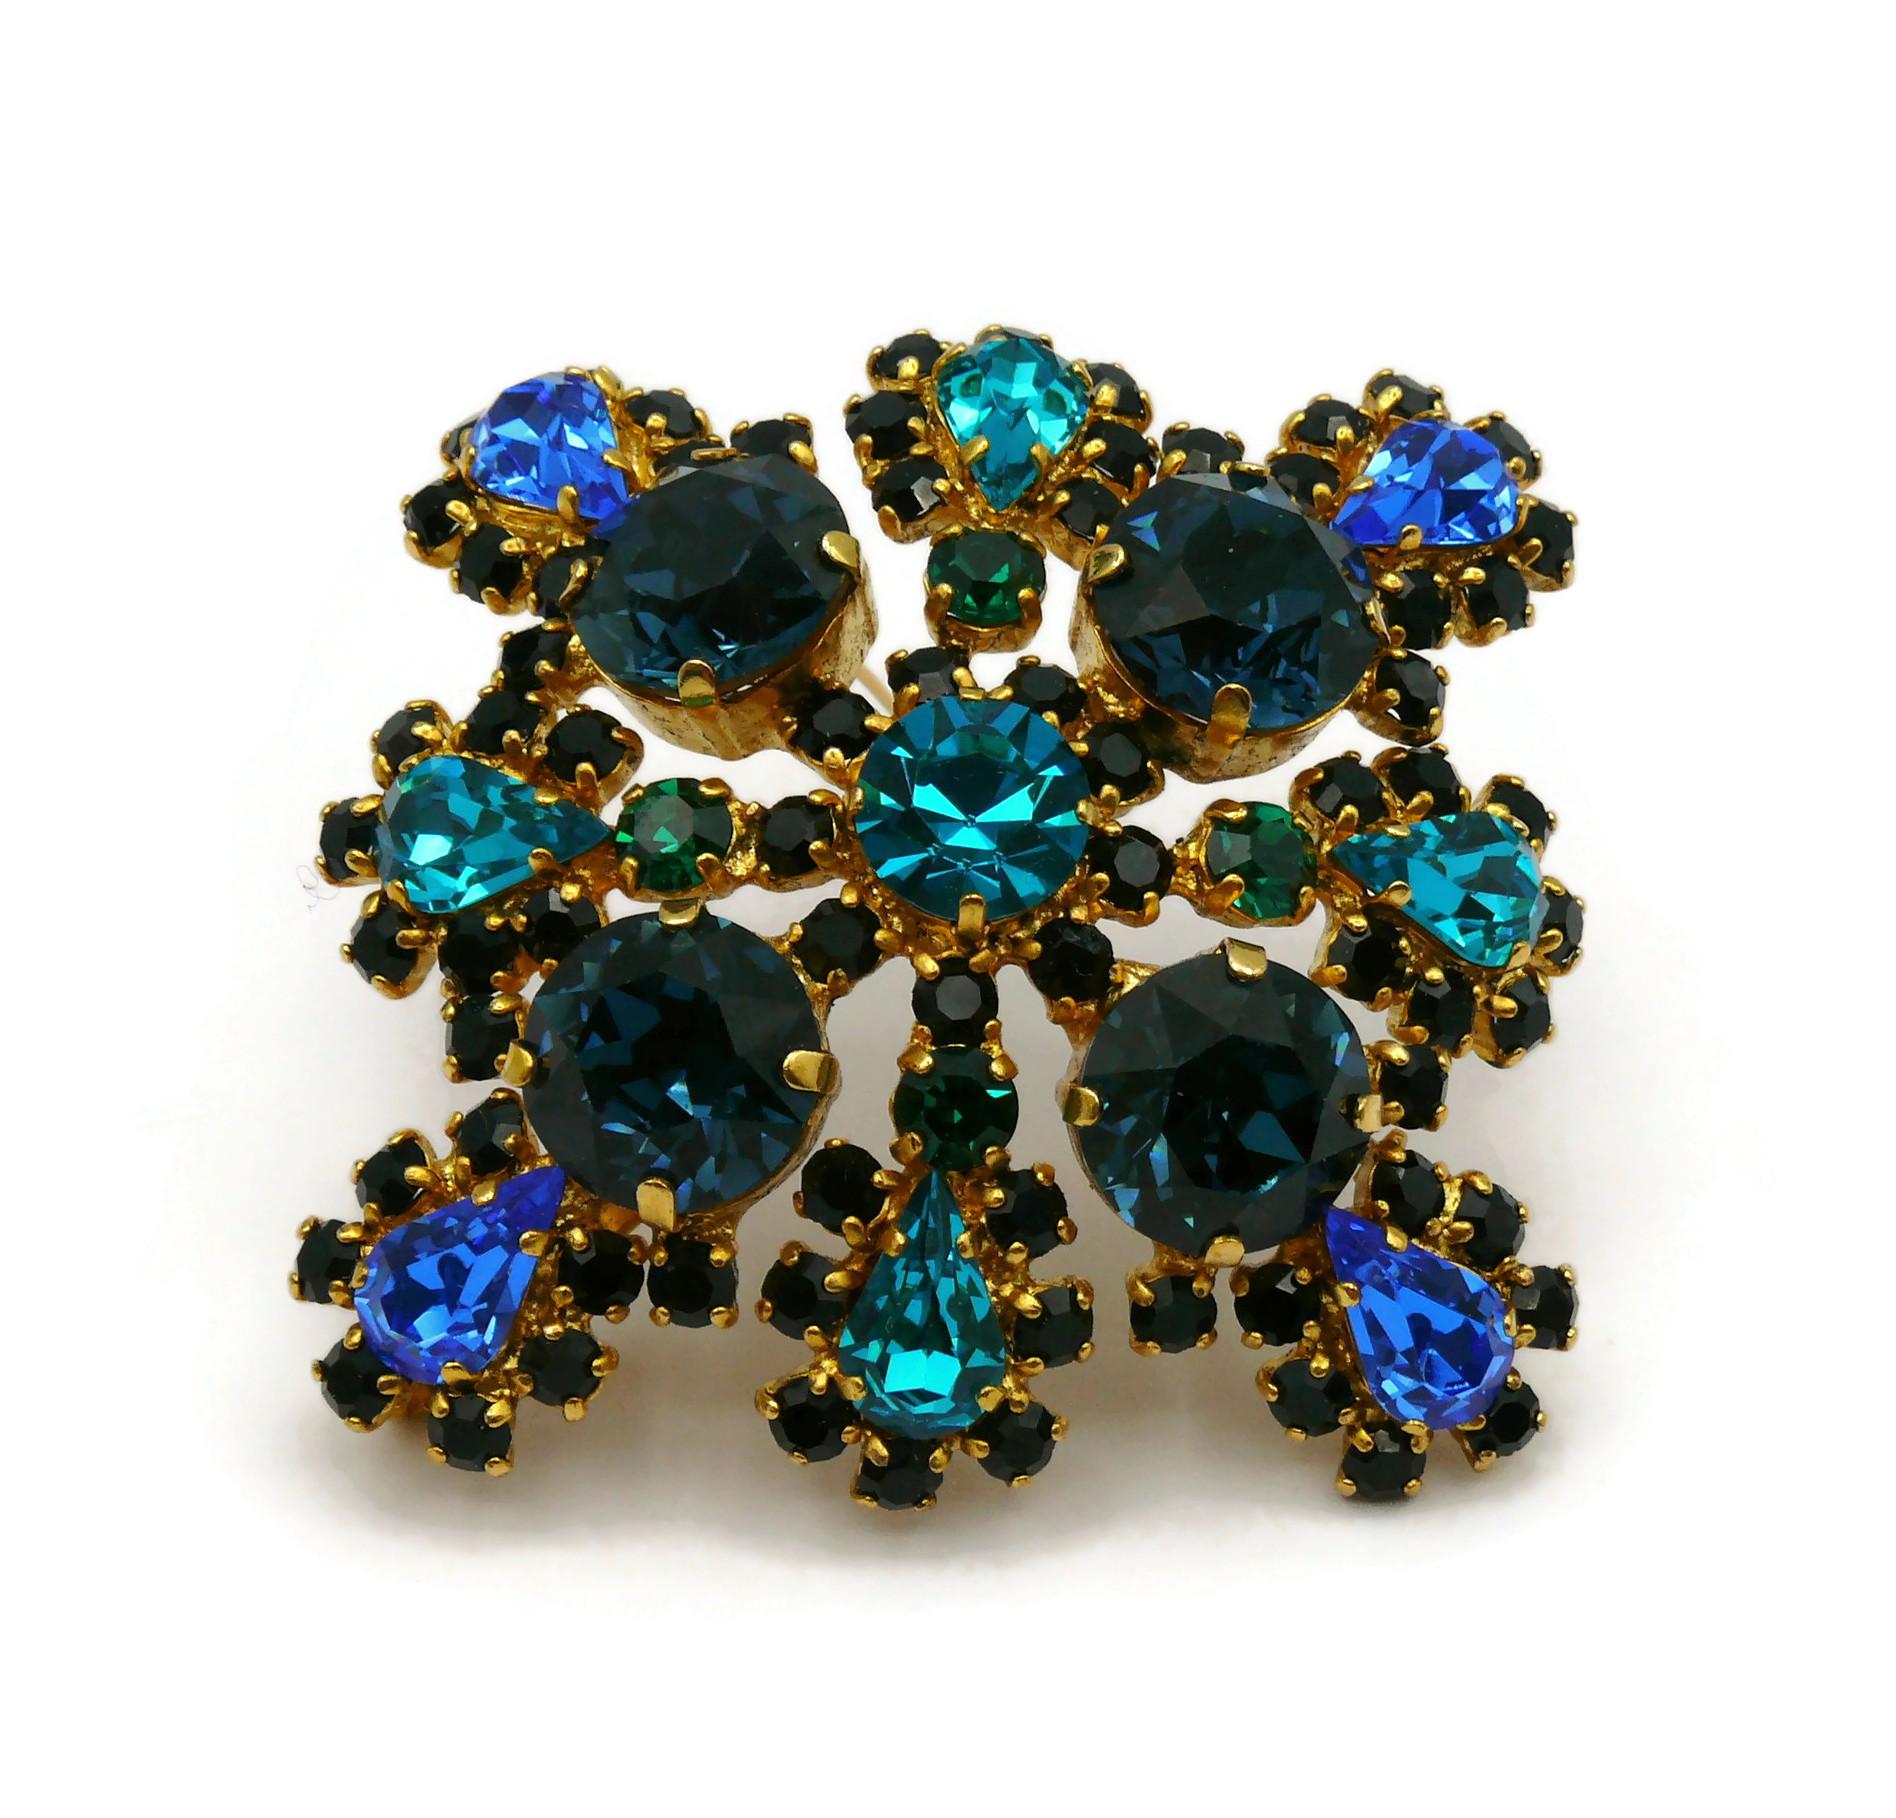 CHRISTIAN DIOR by GIANFRANCO FERRE Vintage Massive Jewelled Brooch Pendant For Sale 1